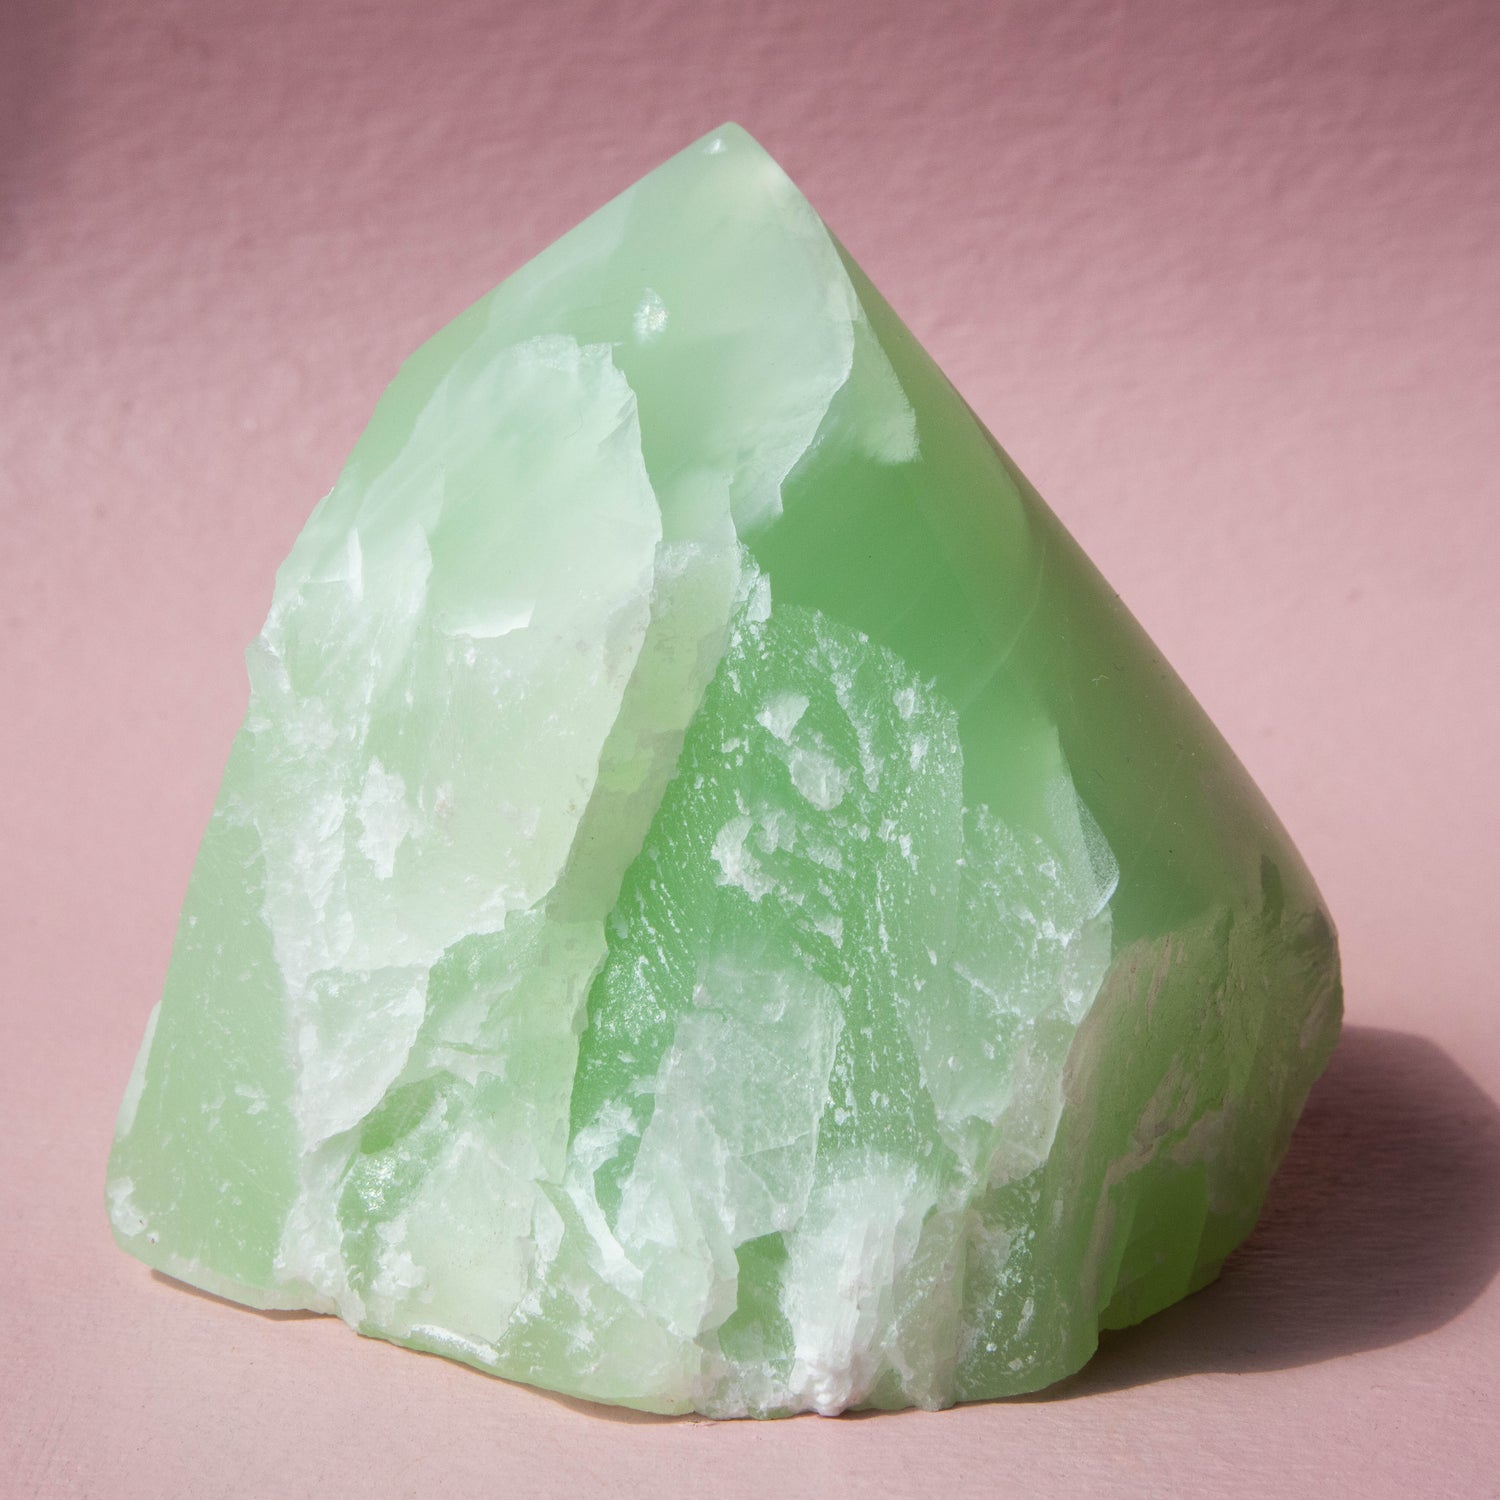 green calcite, green calcite top polished, polished green calcite, crystal point, crystal top, green calcite crystal, green calcite stone, green calcite gemstone, green calcite properties, green calcite healing properties, green calcite metaphysical properties, green calcite meaning